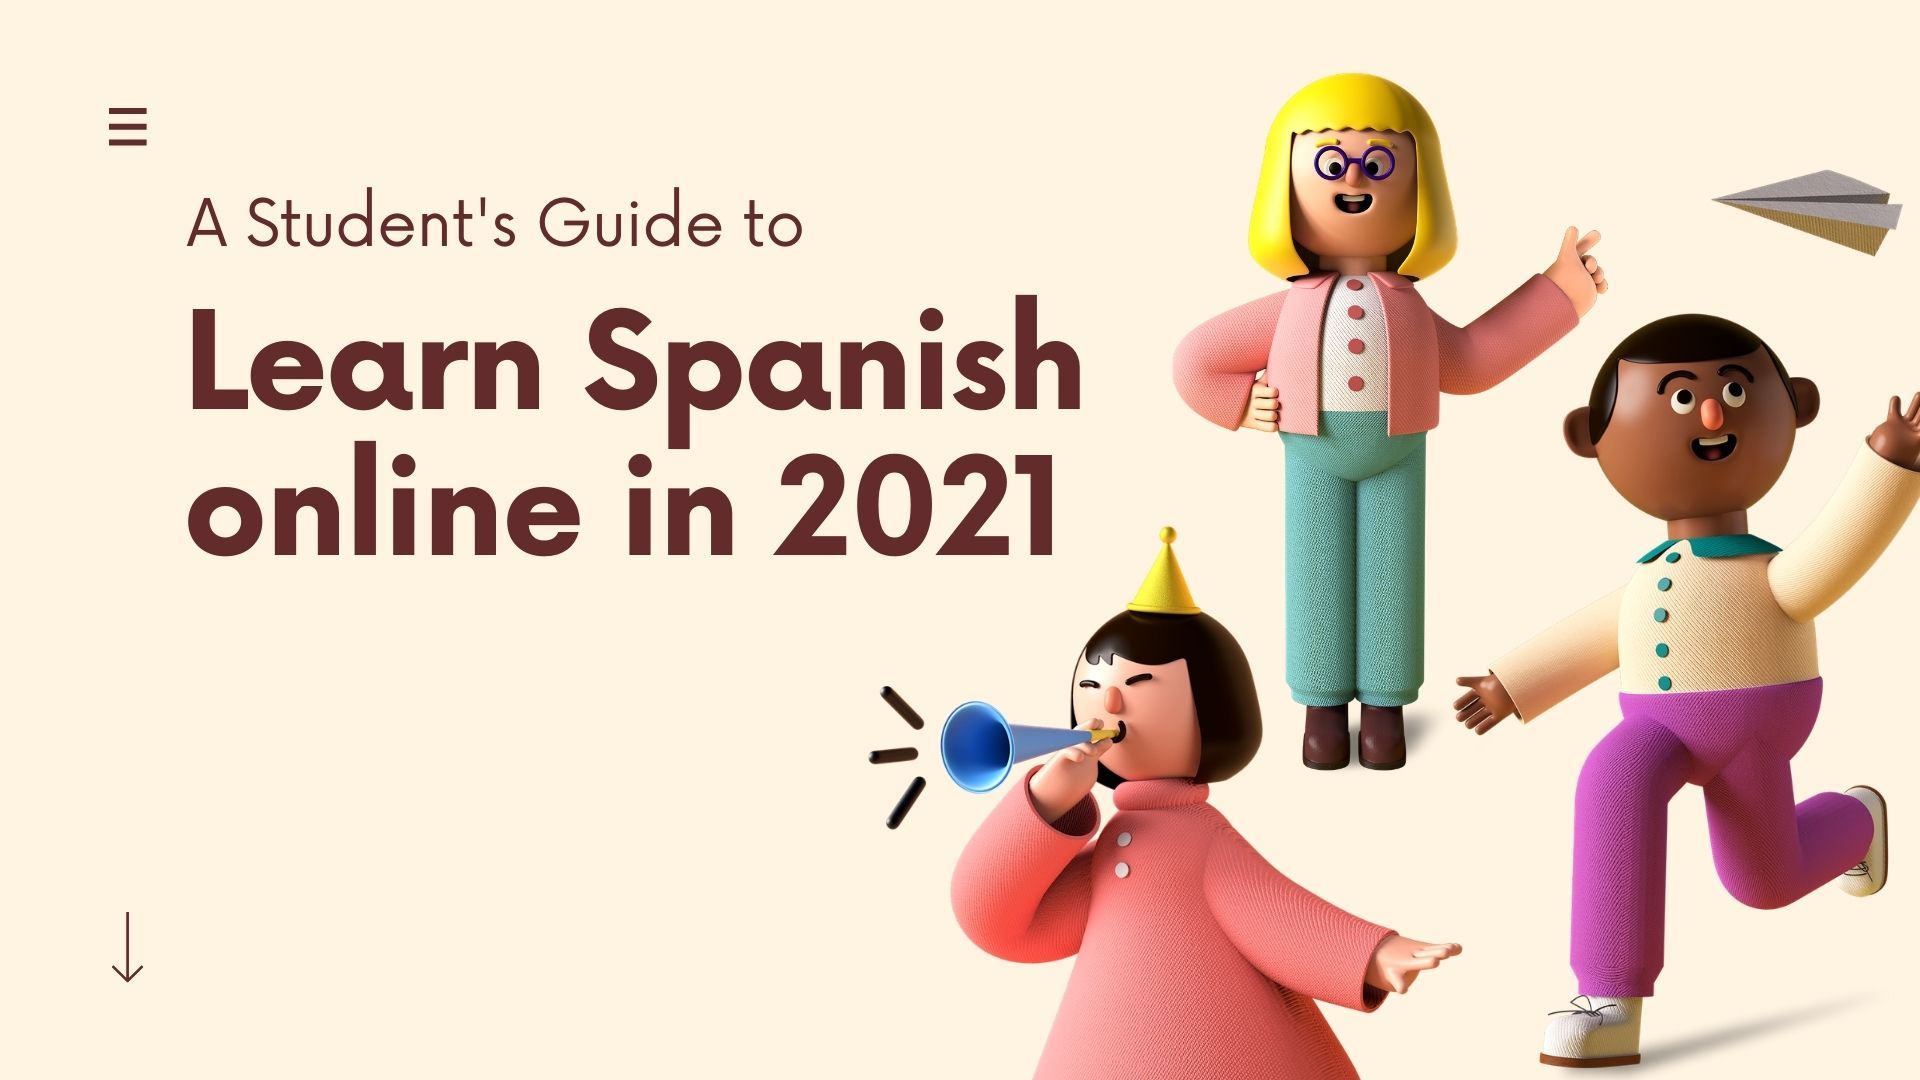 Learn Spanish for 2021 – How Lingopie Will Keep You on Track